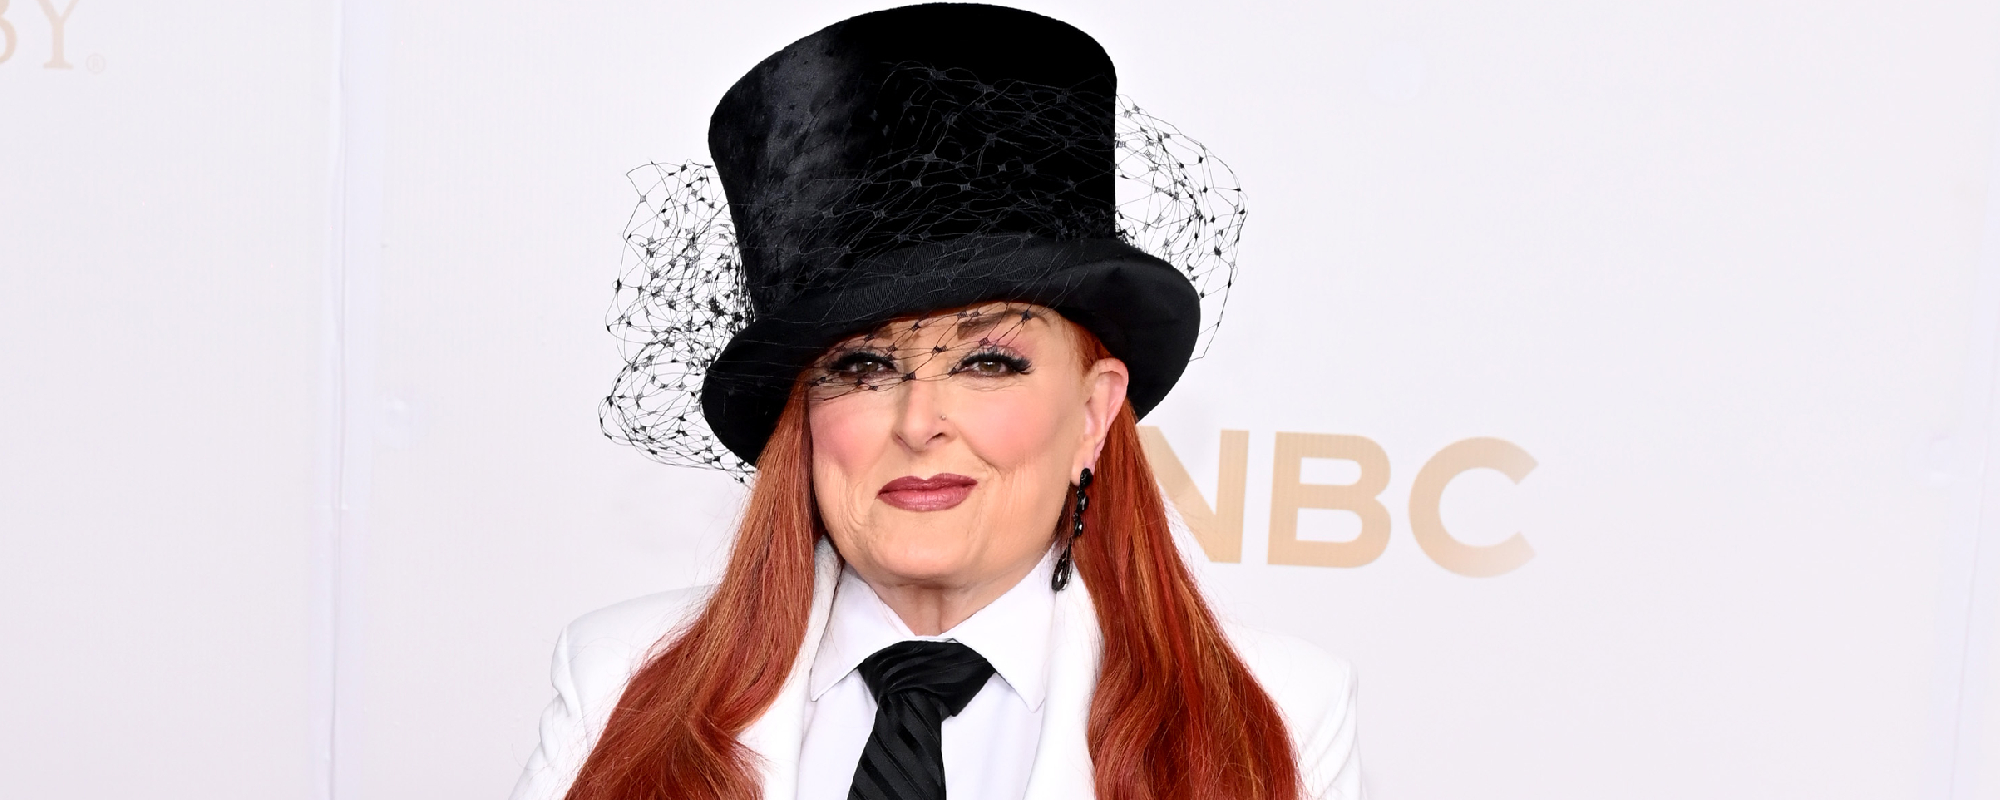 Wynonna Judd Breaks Silence on Her Viral National Anthem at the Kentucky Derby, Says “My Papaw Would Be So Proud”